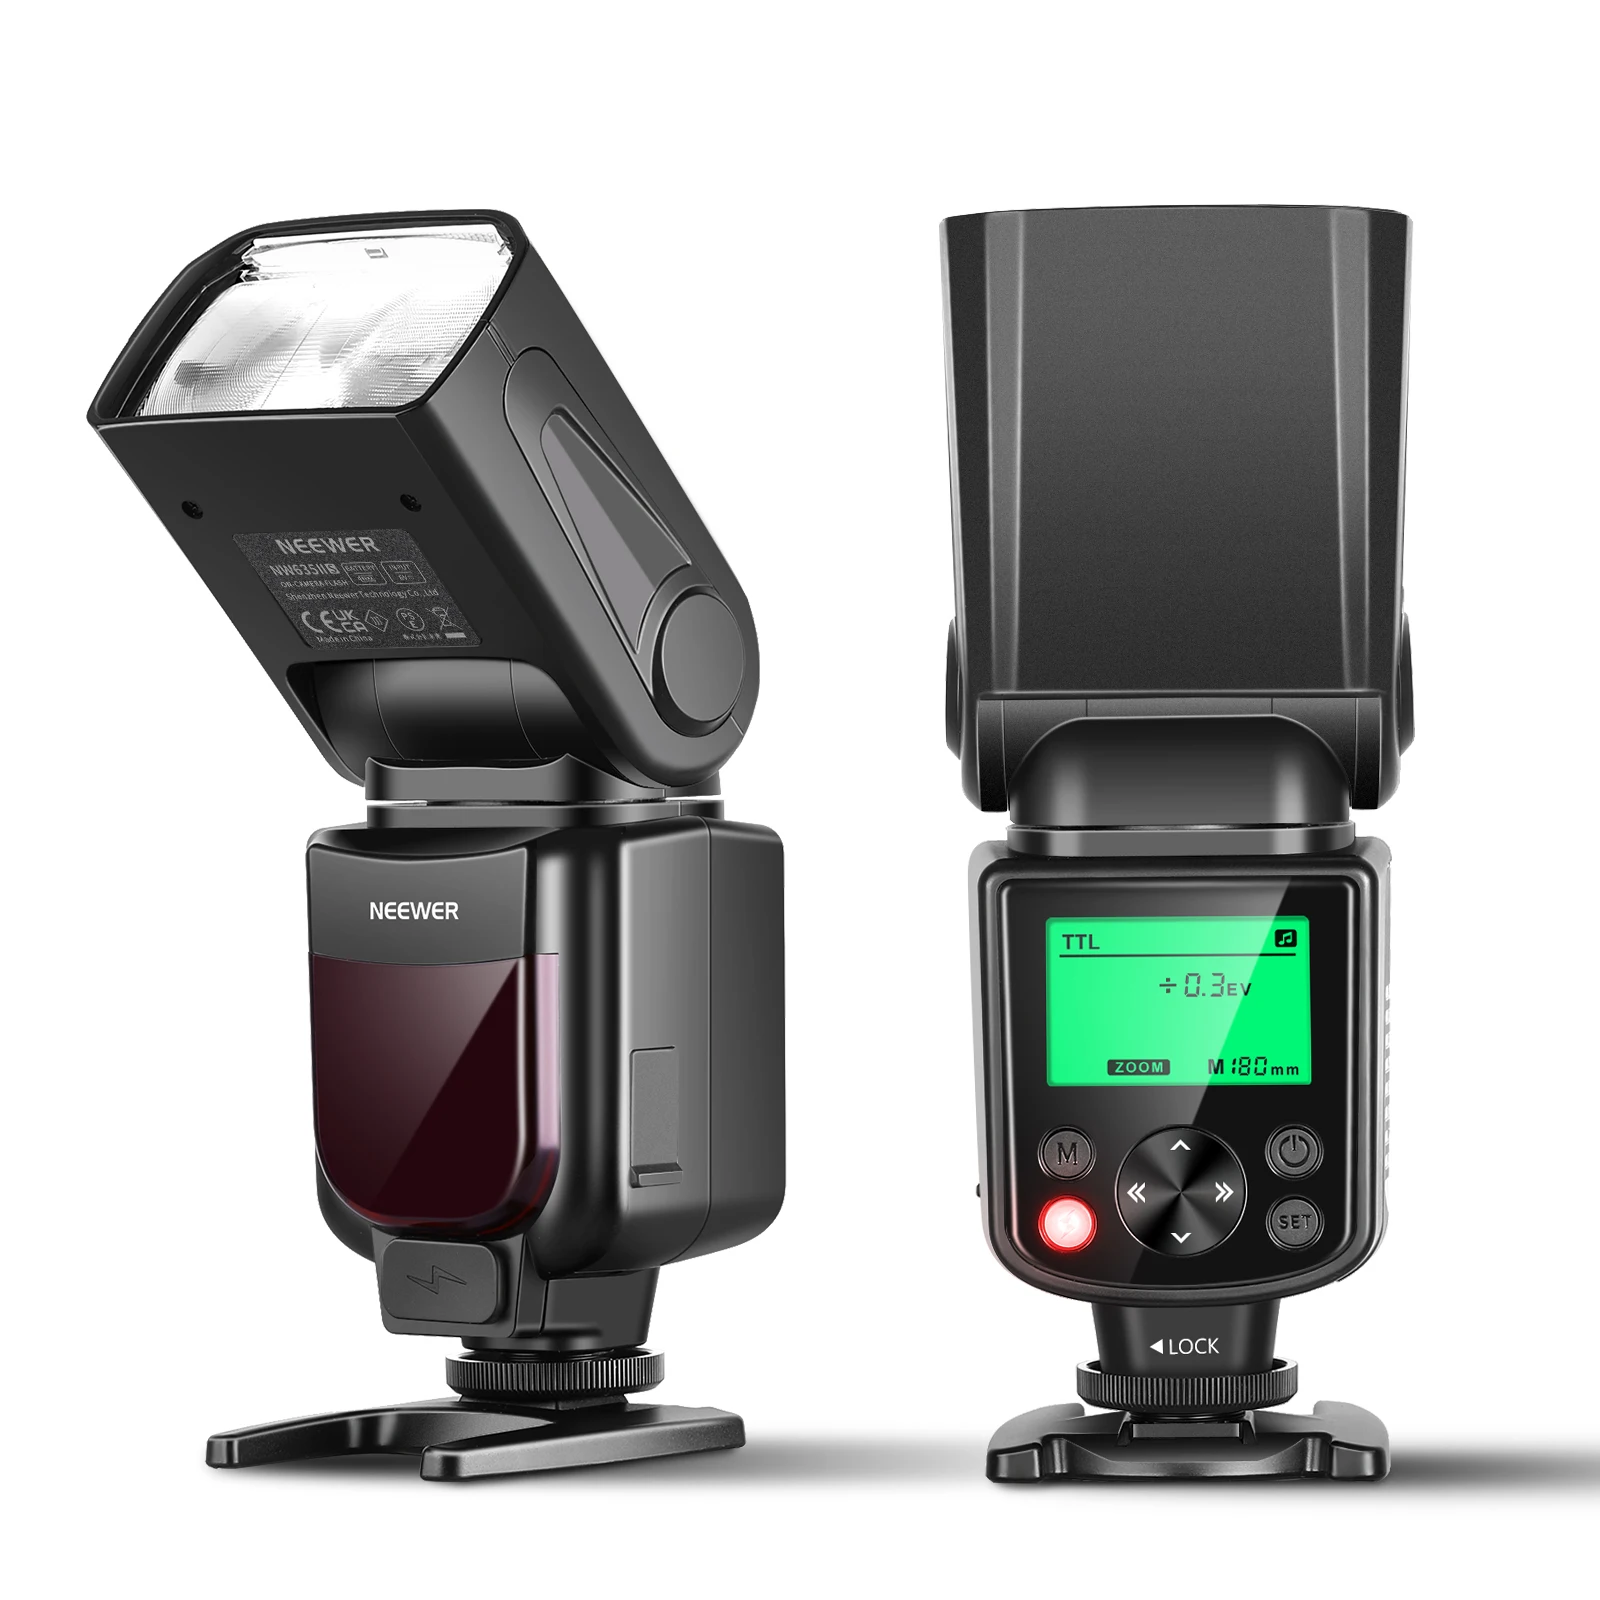 

NEEWER Upgraded NW635II-S TTL Camera Flash Speedlite With LCD Screen, Compatible With Sony A9 II A9 A7R IV A7 IV A7R III A7S III